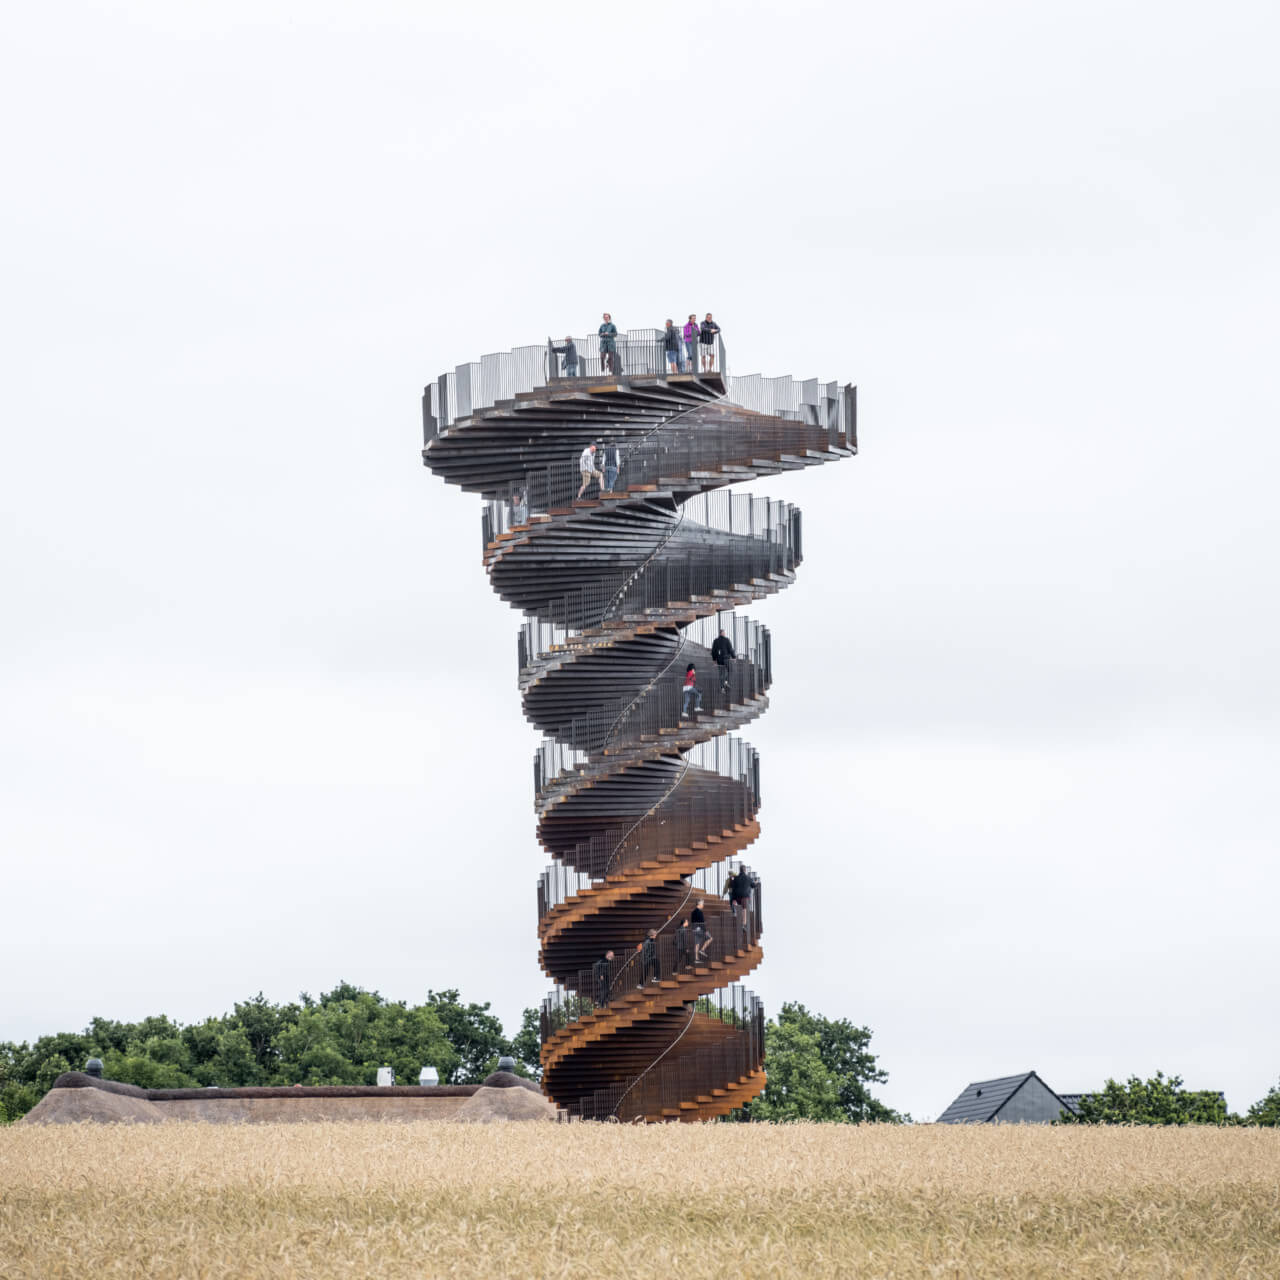 view of a spiraling observation tower surrounded by marshland